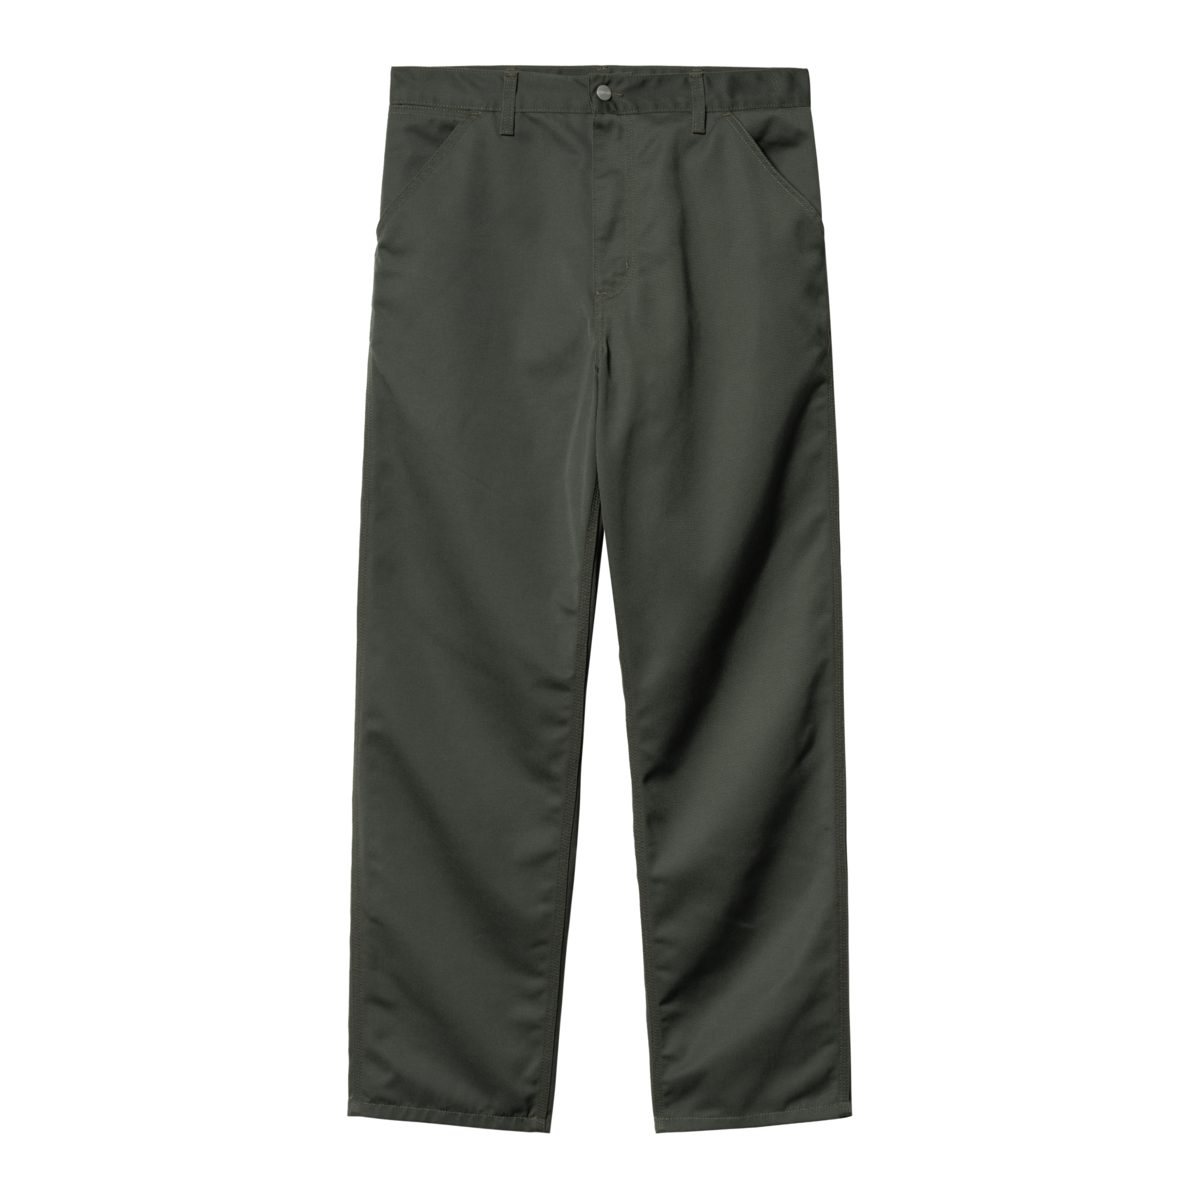 Simple Pant von Carhartt WIP in farbe Olive.